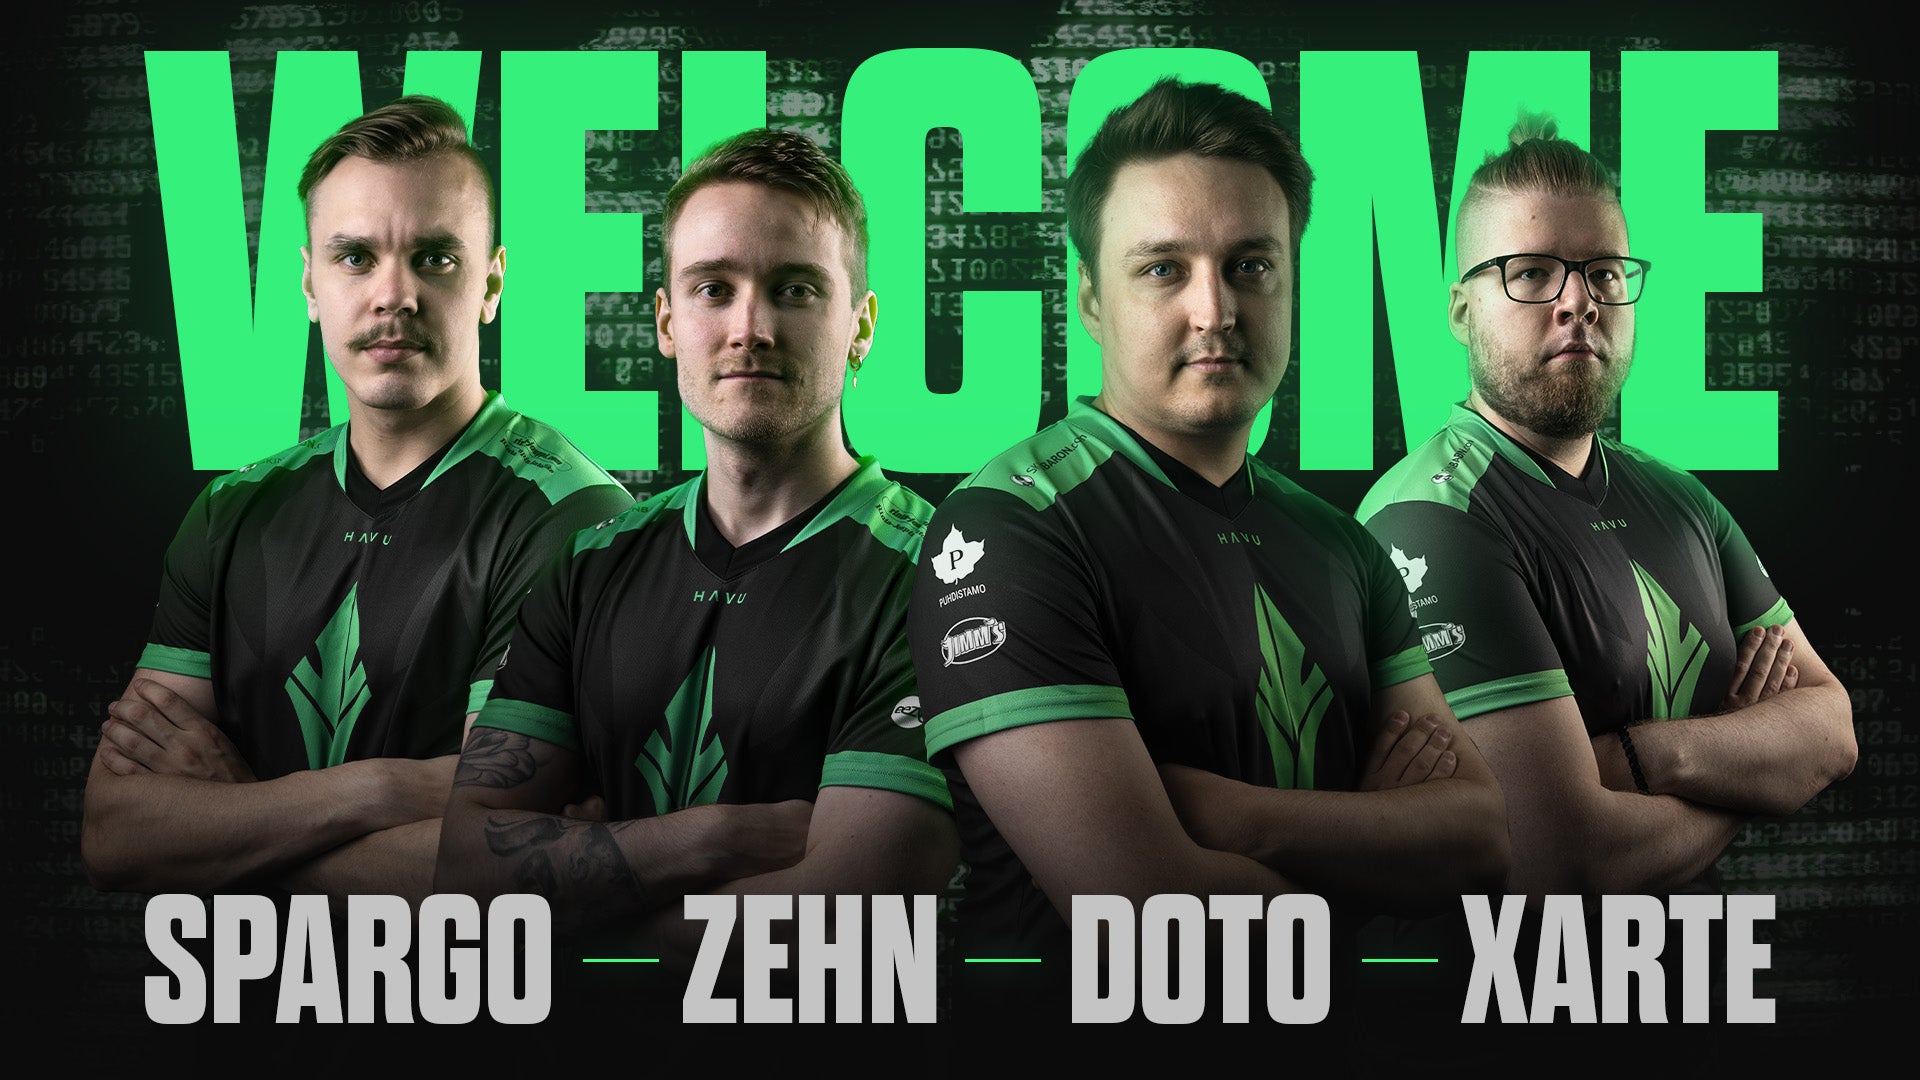 Welcome back zehN & doto and welcome Spargo & xartE